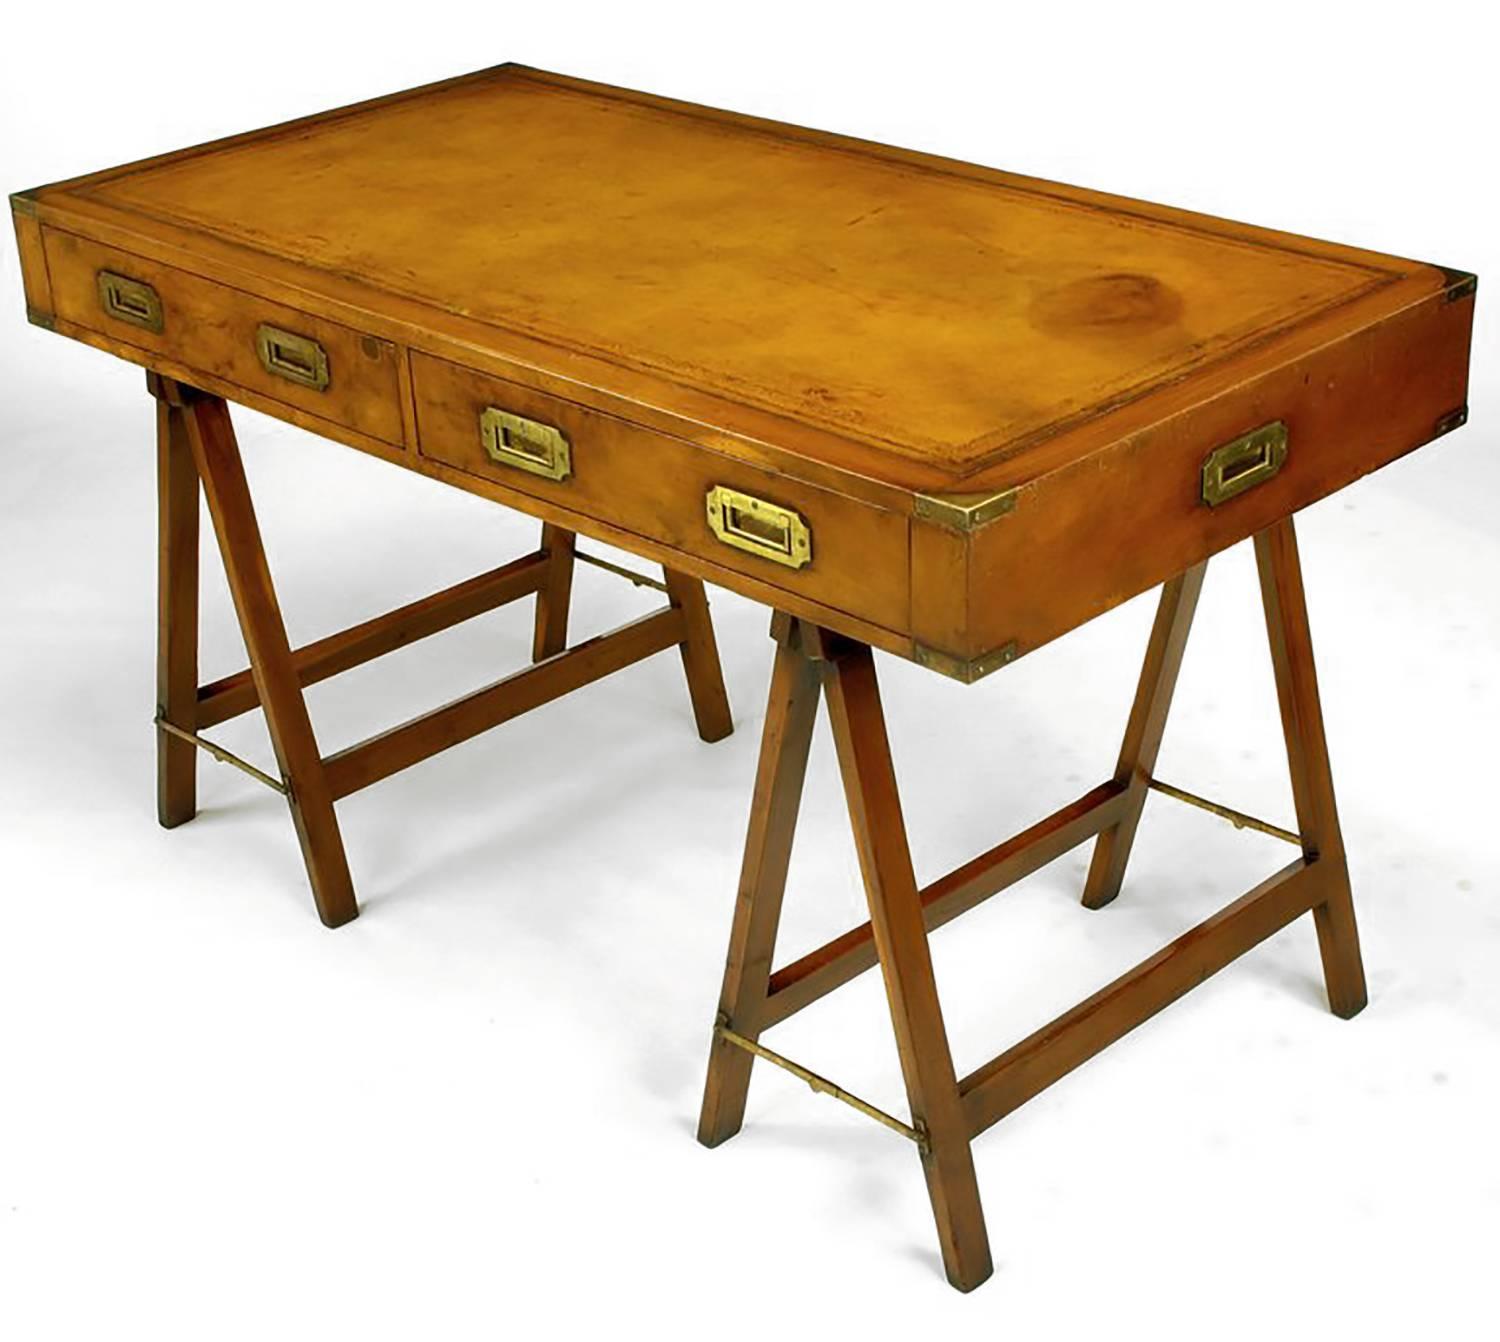 Original early 1900s campaign desk with tooled leather top. Desk has two drawers with double brass recessed pulls and brass caps on every corner. Double 